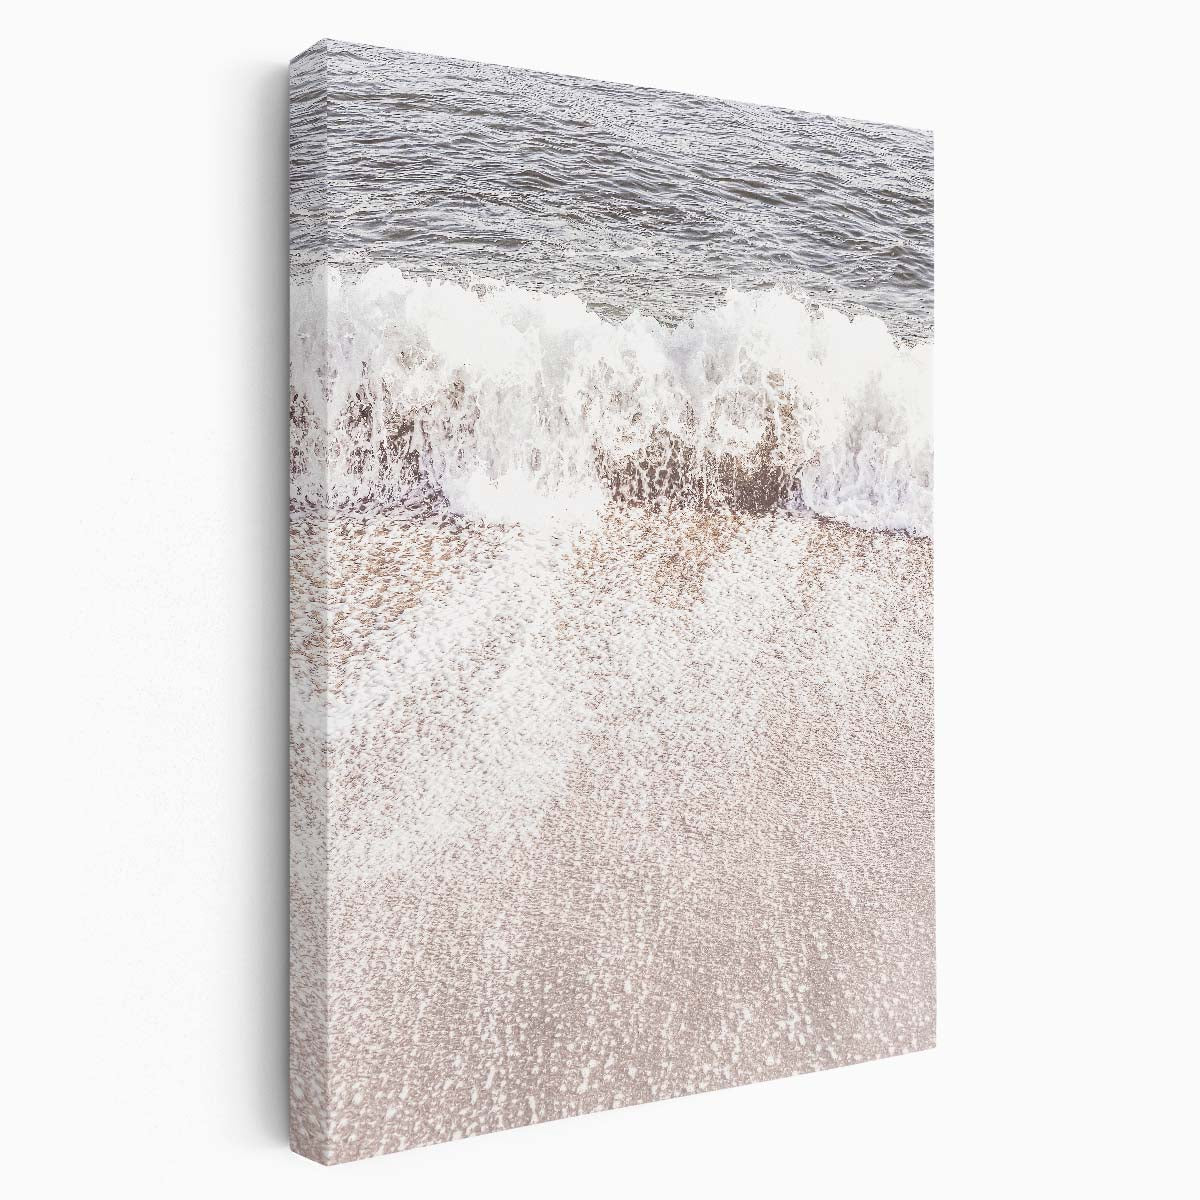 Abstract Beige Coastal Seascape Ocean Waves Photography Wall Art by Luxuriance Designs, made in USA